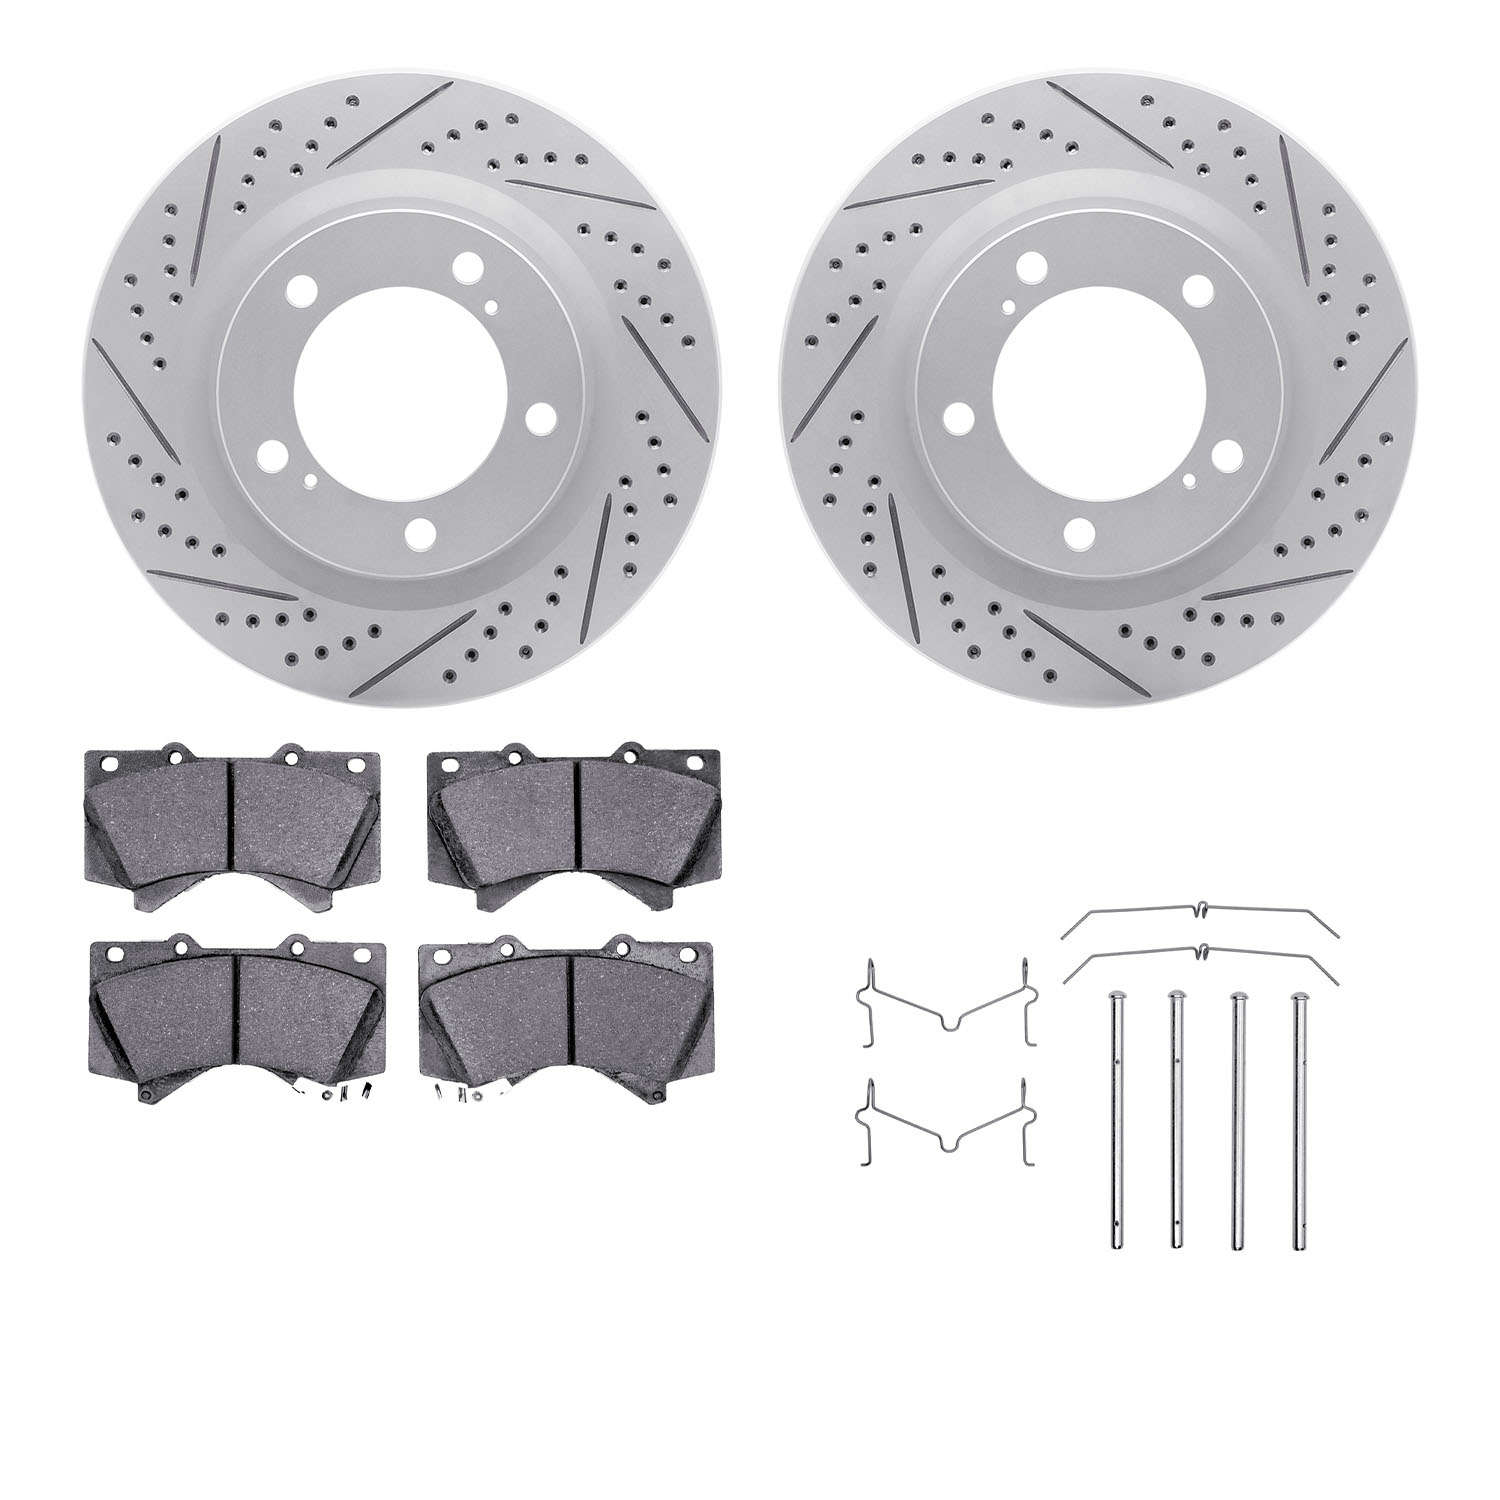 2212-76005 Geoperformance Drilled/Slotted Rotors w/Heavy-Duty Pads Kit & Hardware, Fits Select Lexus/Toyota/Scion, Position: Fro